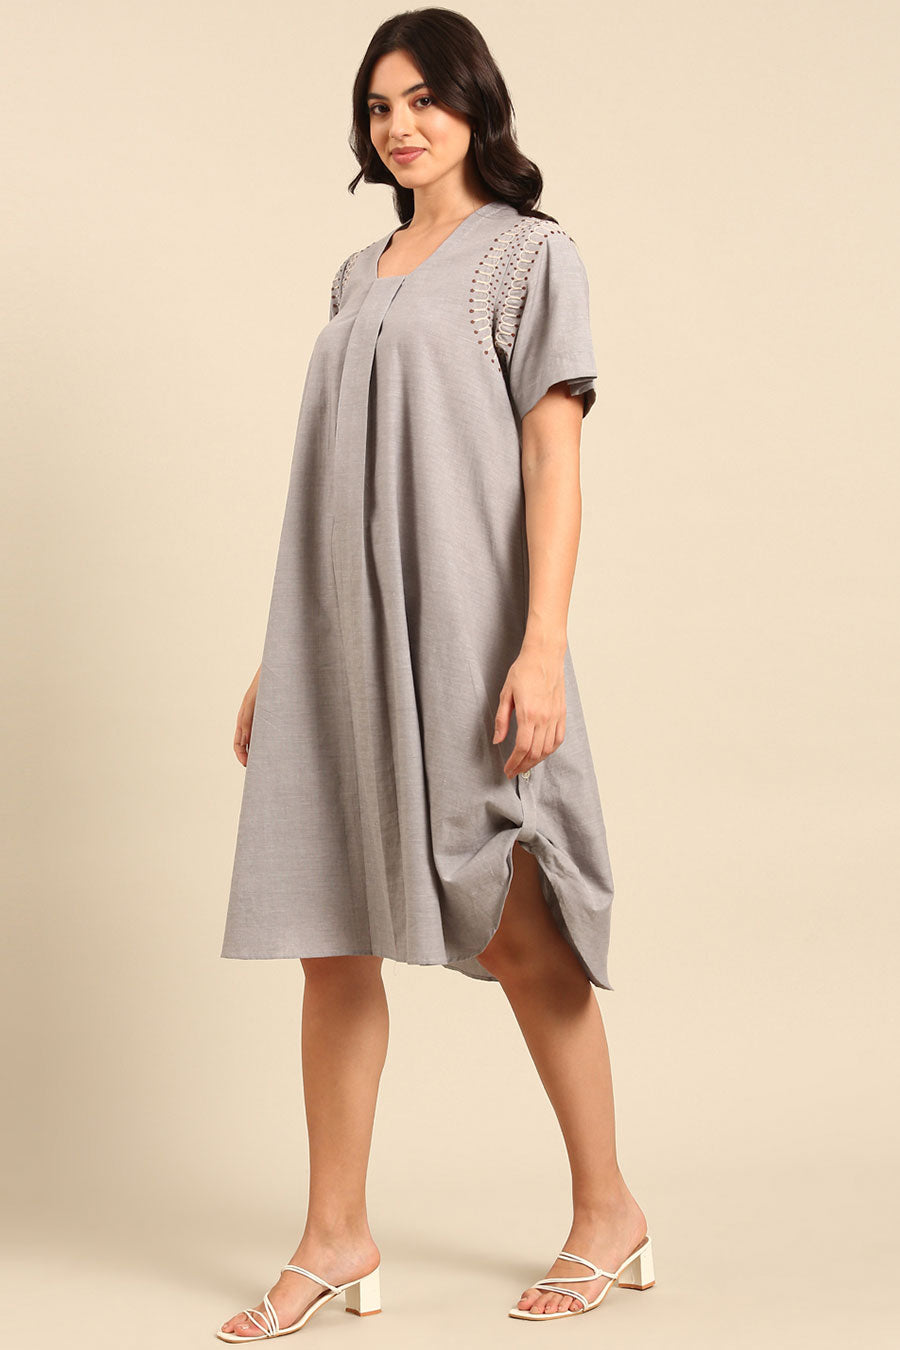 Grey Embroidered A-Line Dress